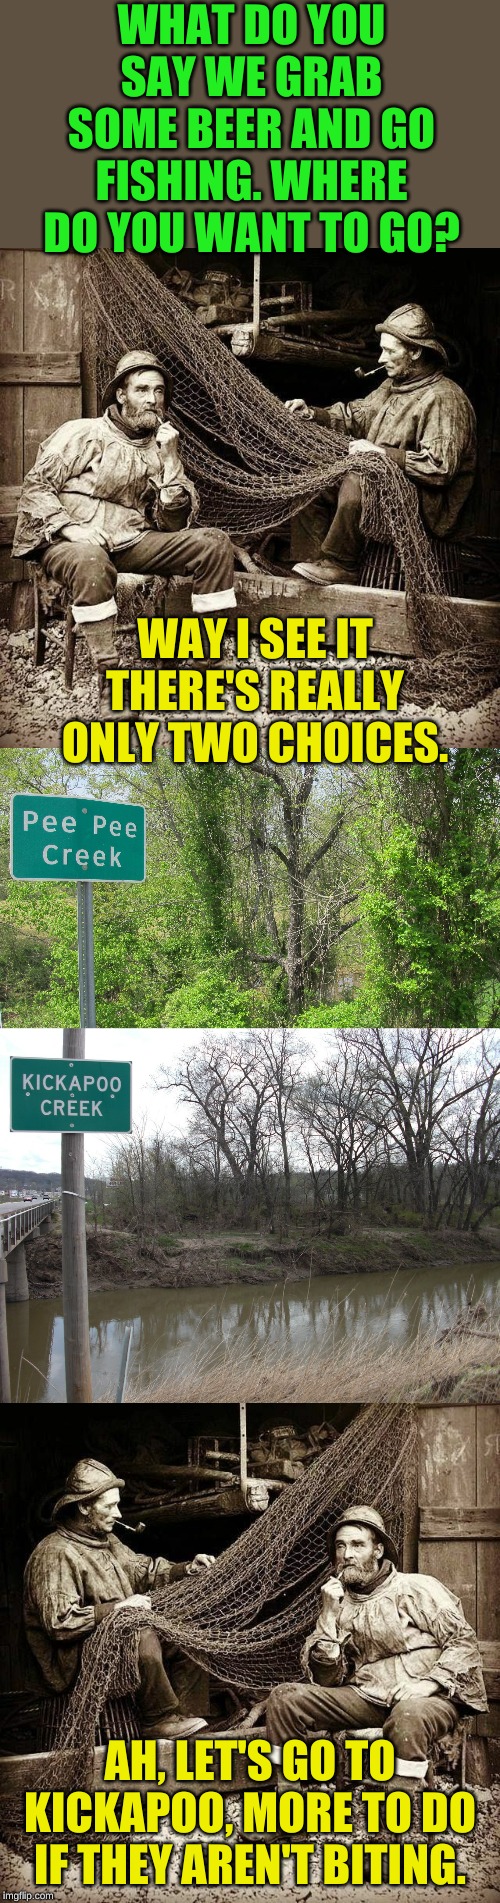 Planning a fishing trip...... | WHAT DO YOU SAY WE GRAB SOME BEER AND GO FISHING. WHERE DO YOU WANT TO GO? WAY I SEE IT THERE'S REALLY ONLY TWO CHOICES. AH, LET'S GO TO KICKAPOO, MORE TO DO IF THEY AREN'T BITING. | image tagged in fishermen | made w/ Imgflip meme maker